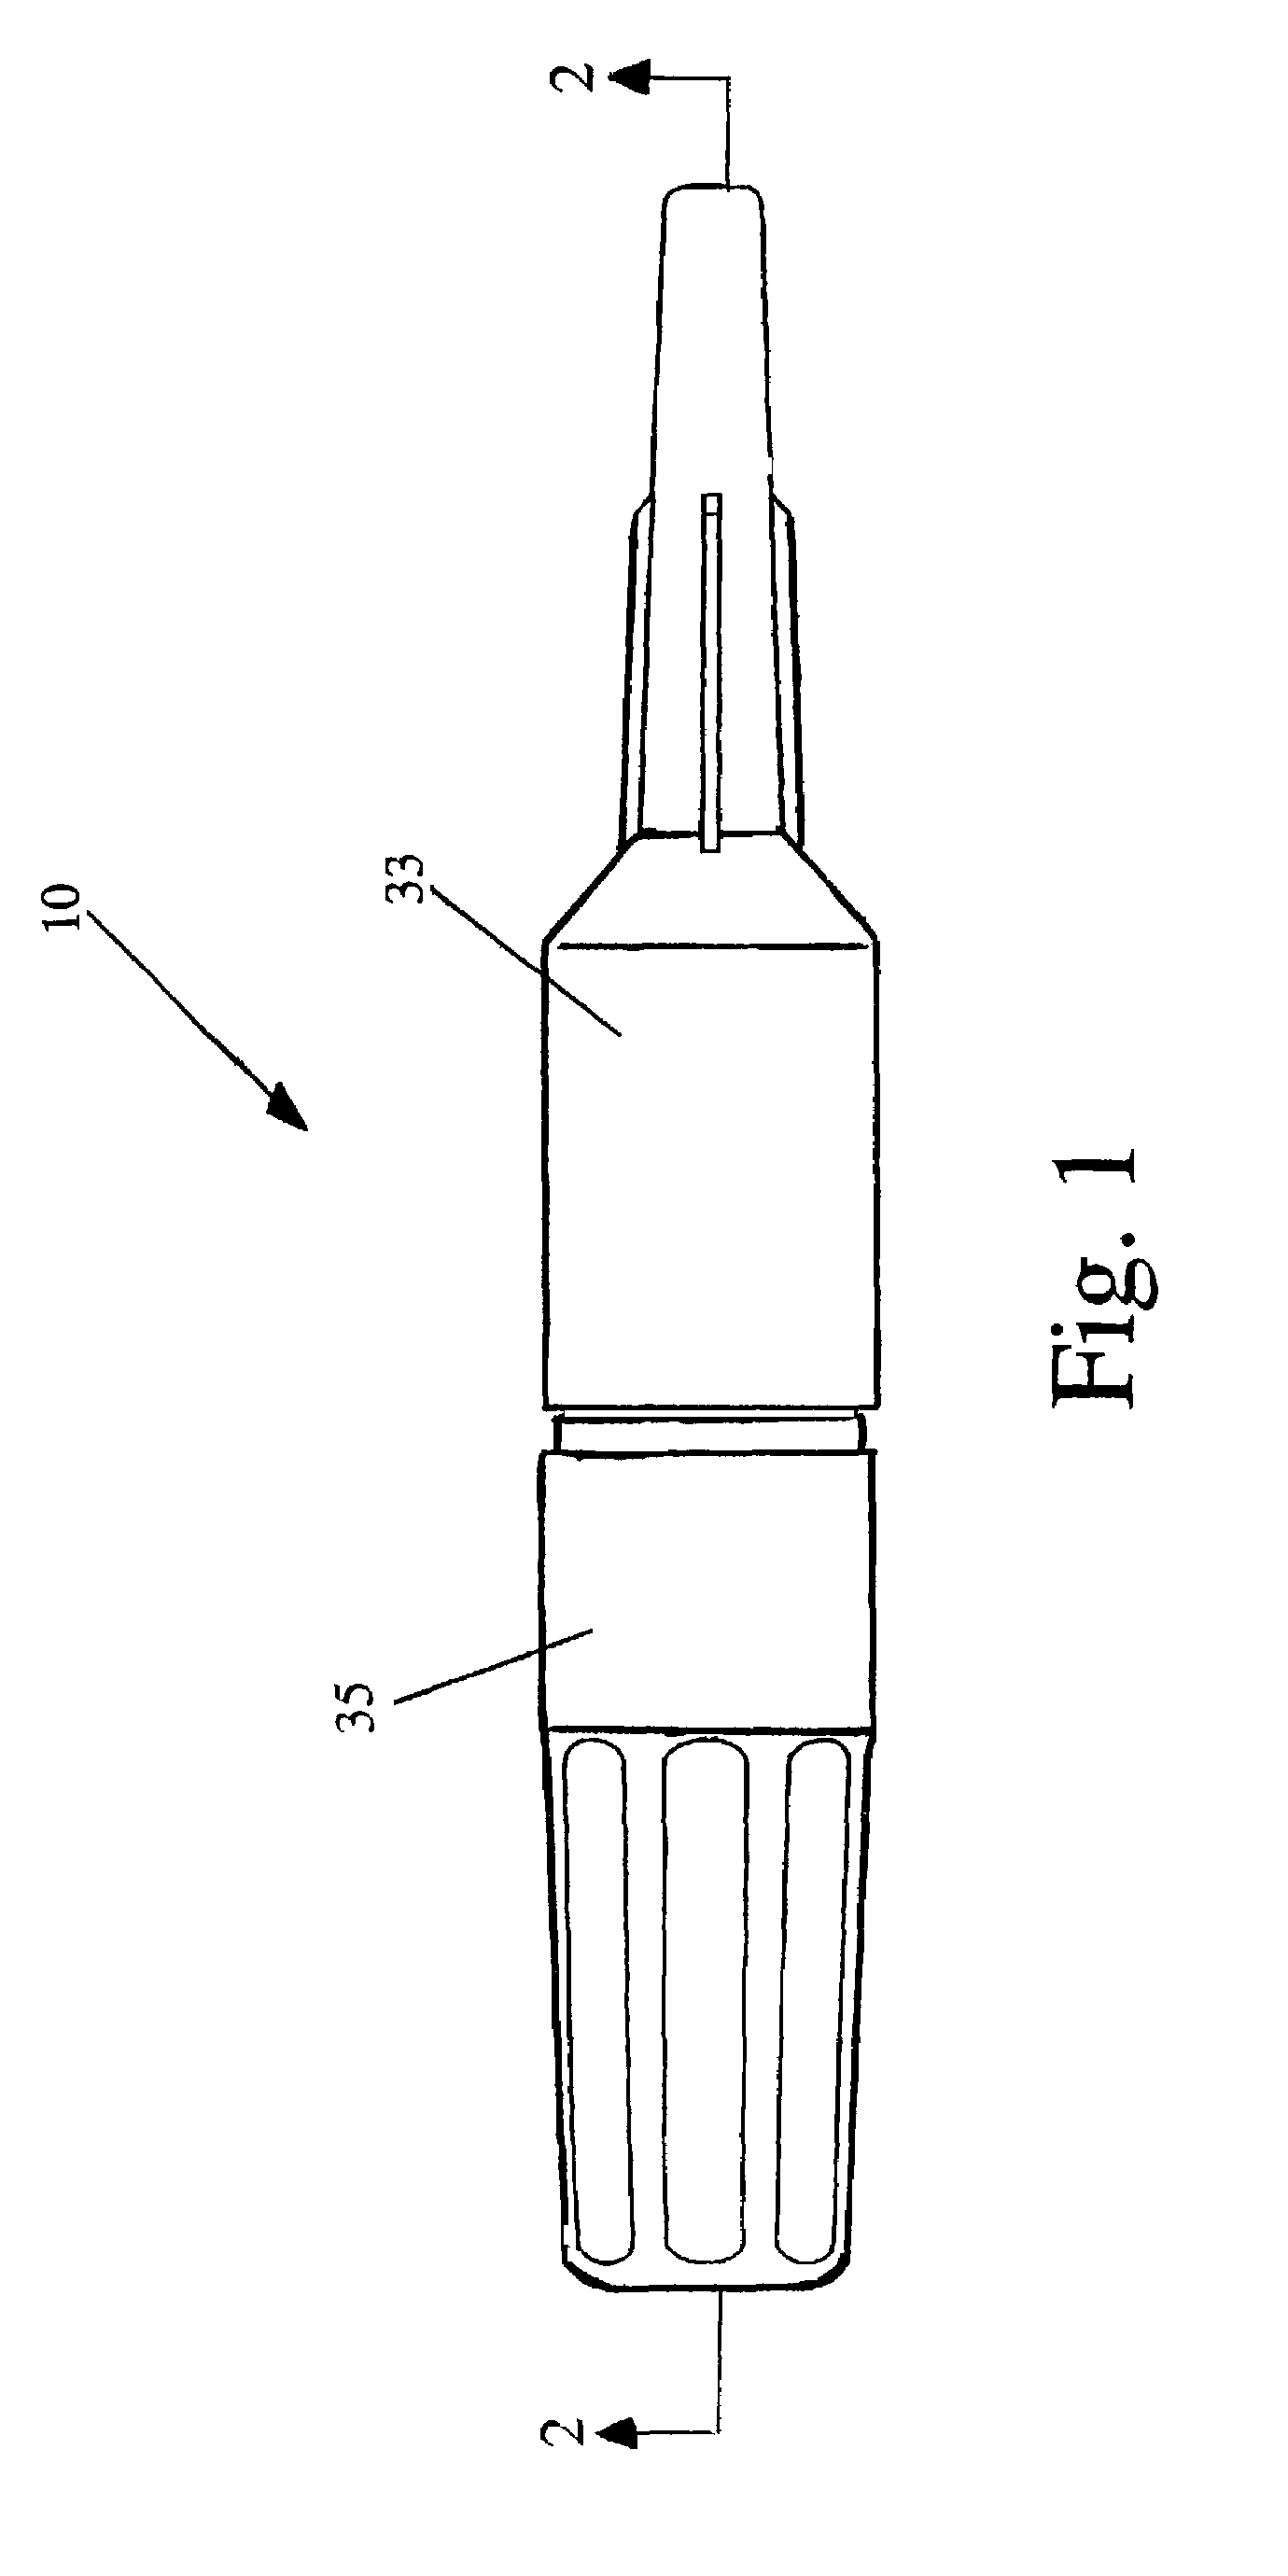 Pre-filled retractable needle injection device